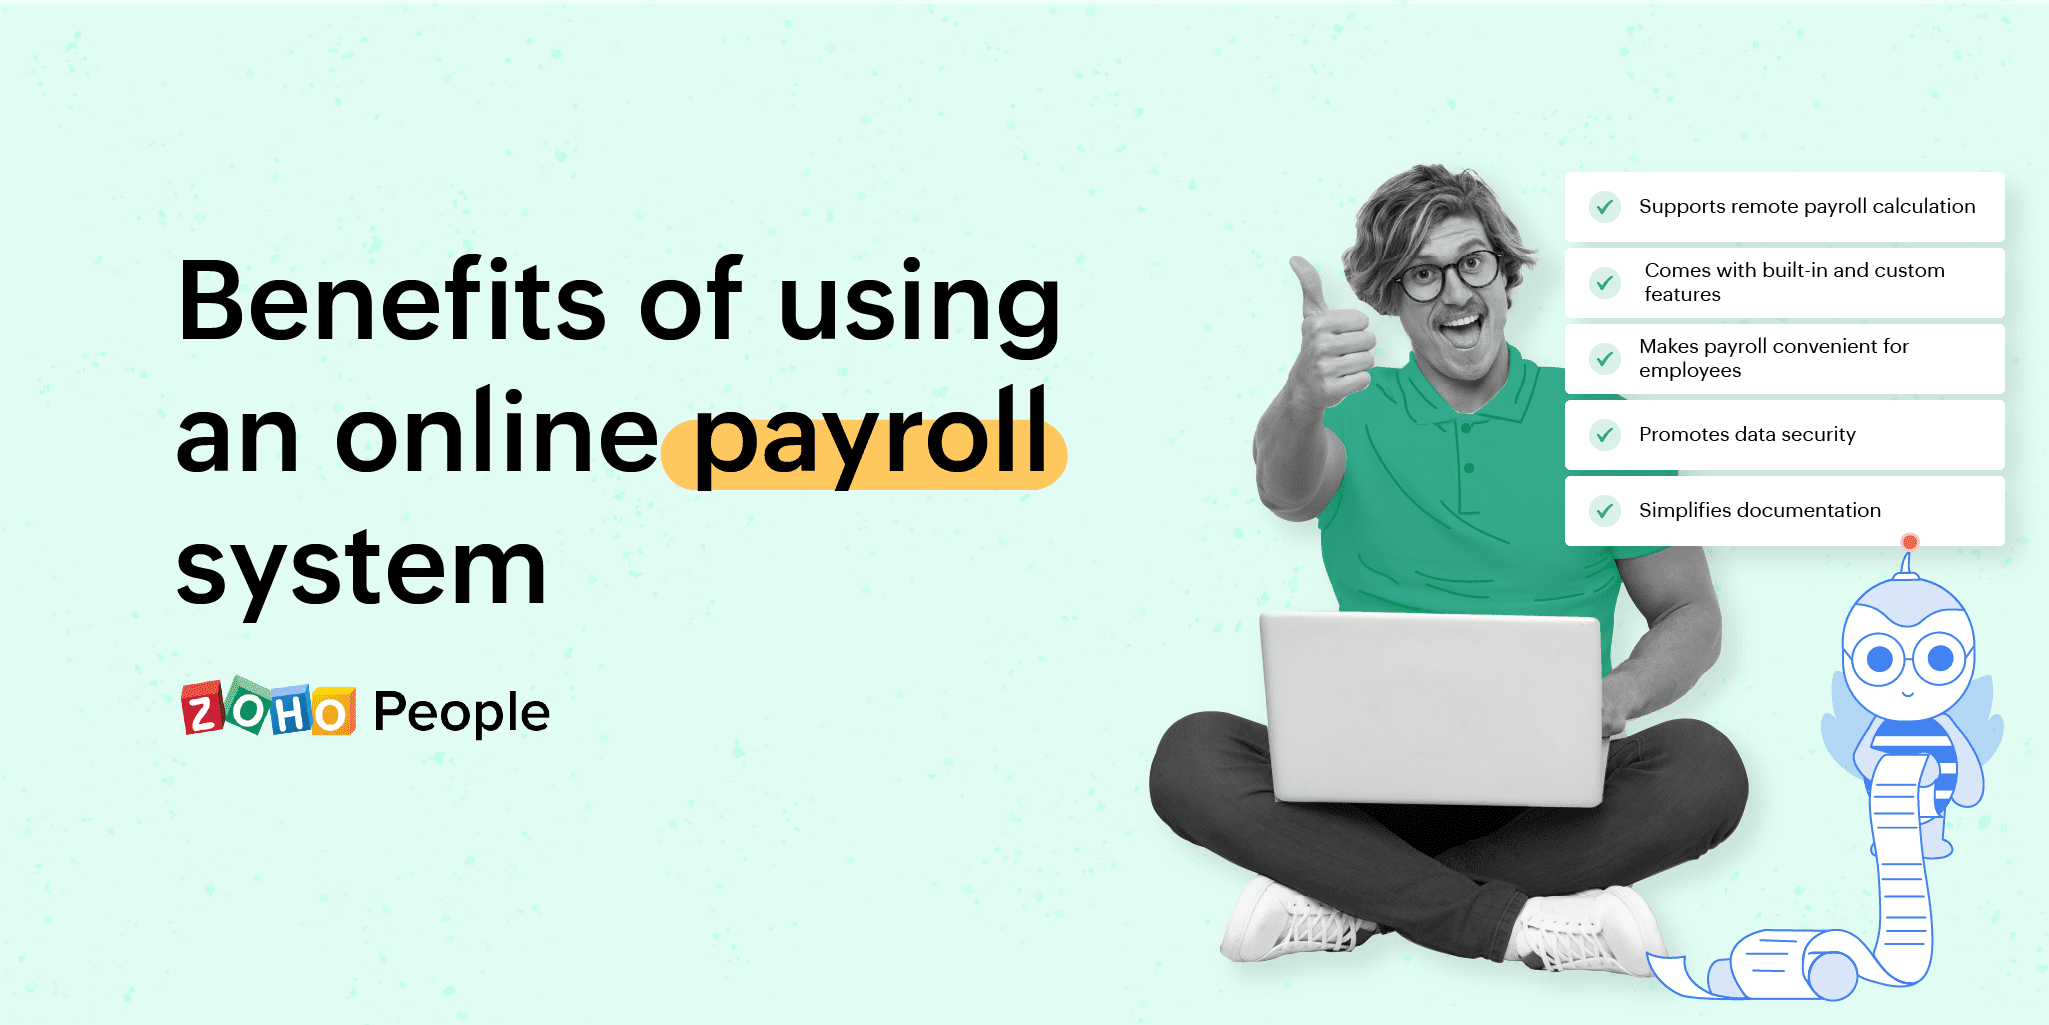 5 compelling reasons to adopt an online payroll system